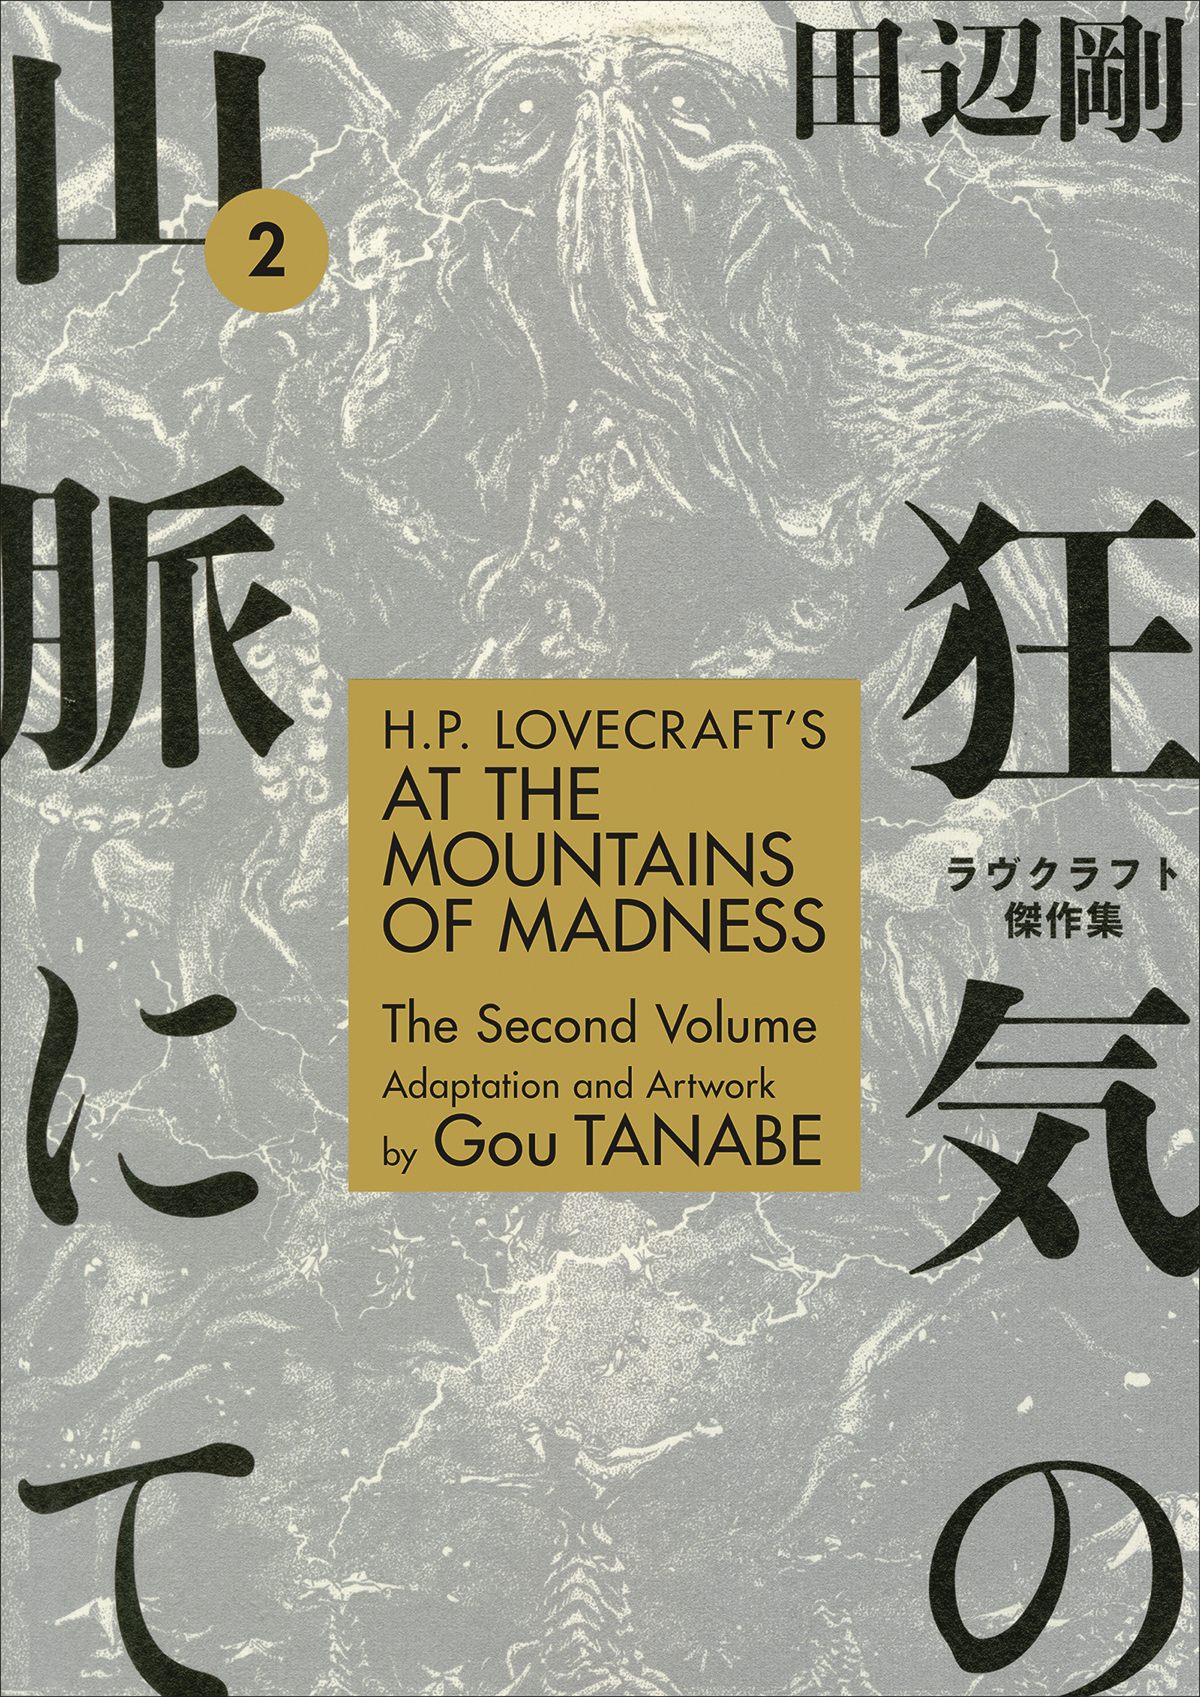 H. P. Lovecraft by Gou Tanabe Graphic Novel Volume 2 At Mountains